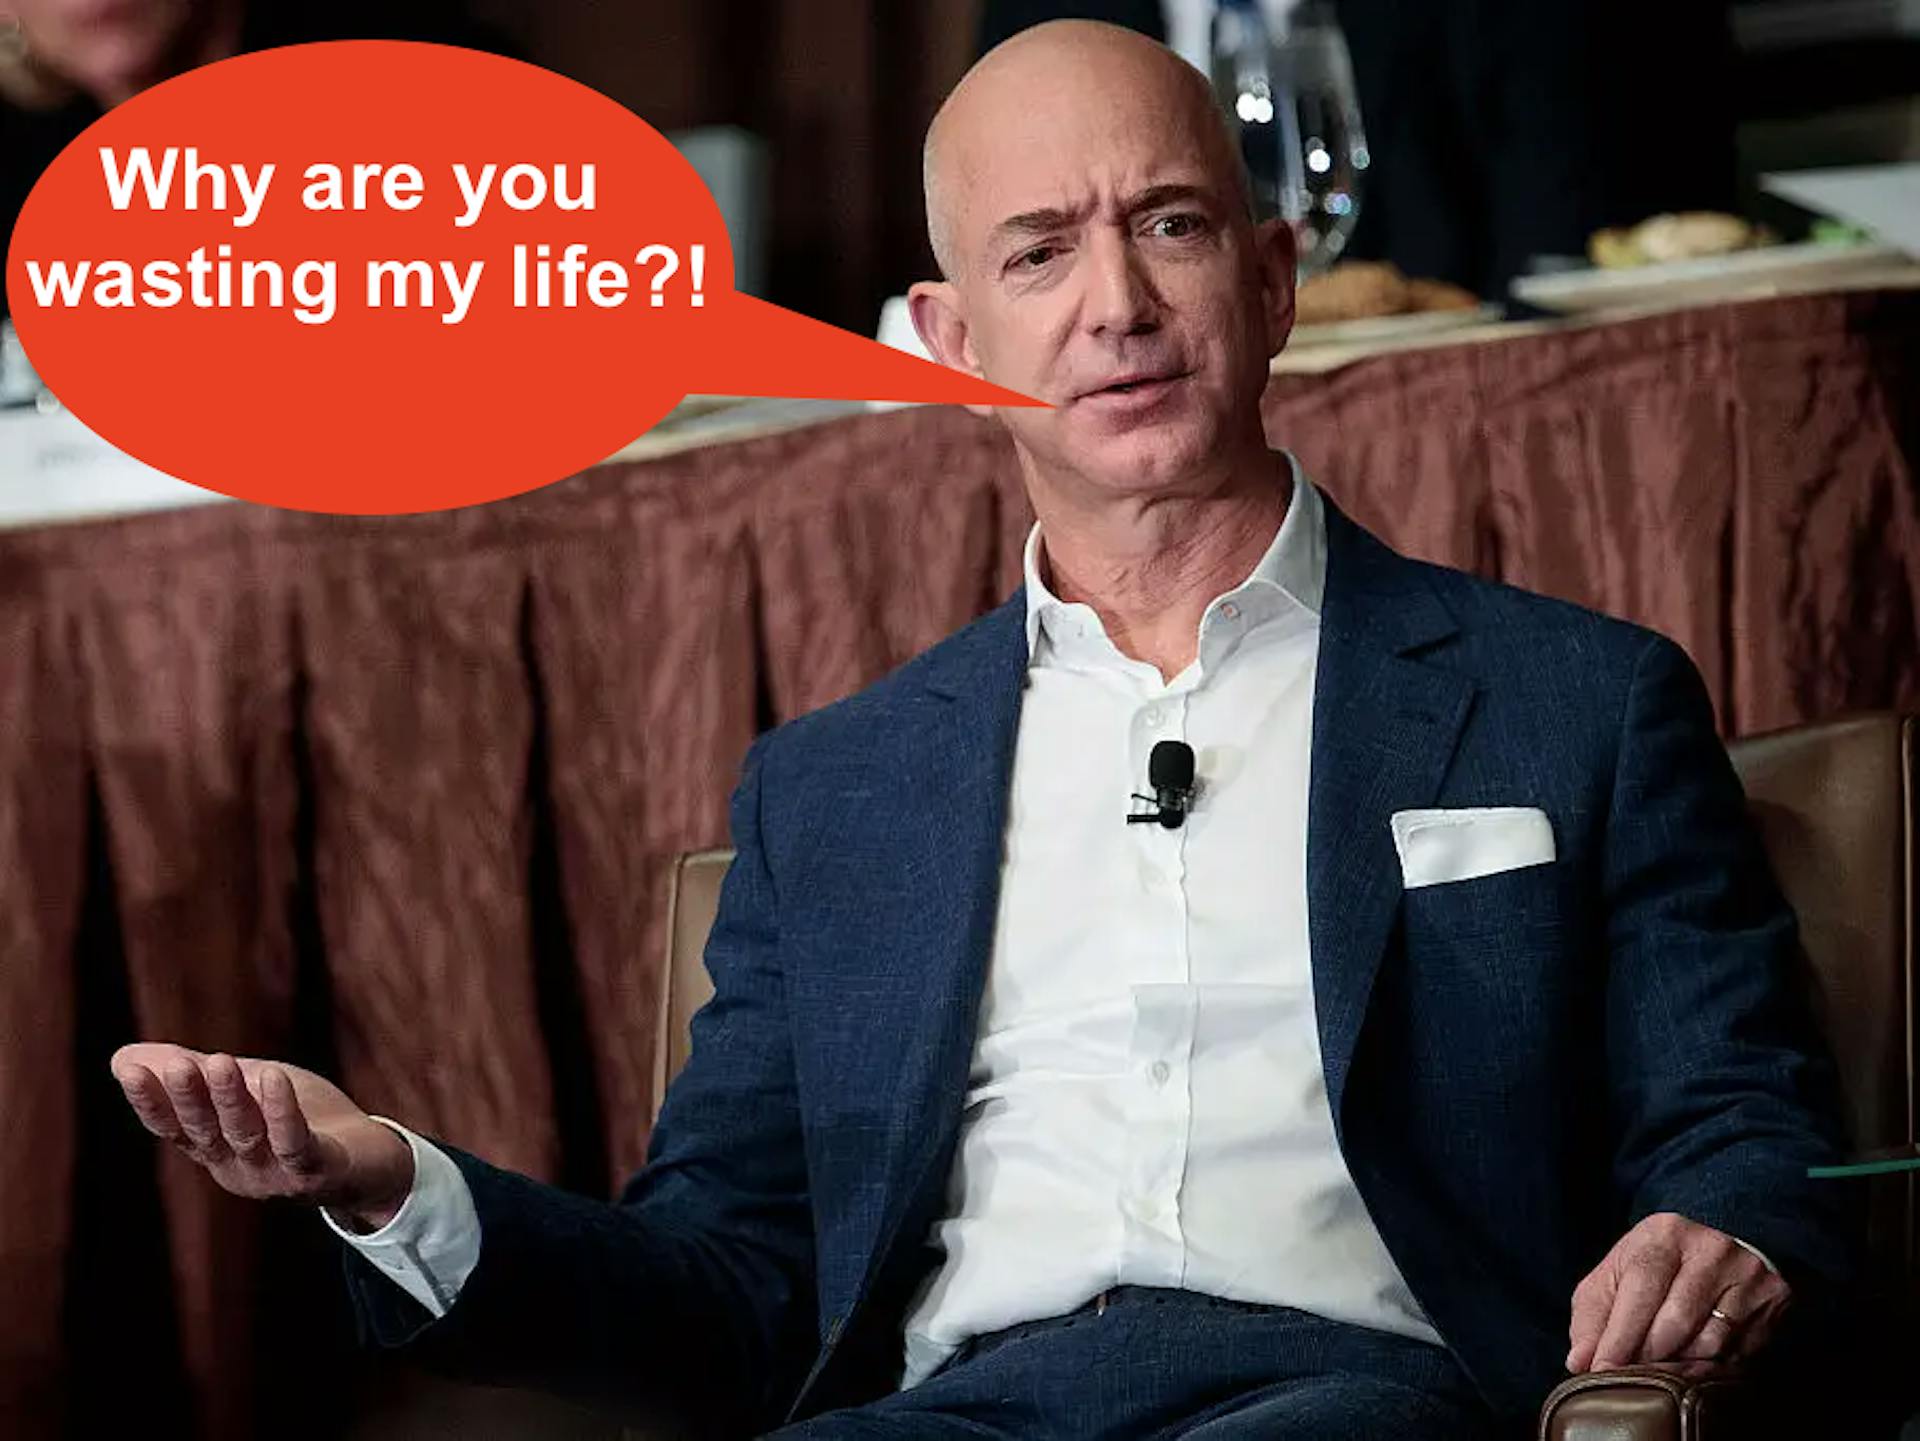 (Allegedly, Jeff Bezos would have said that in one of his outbursts. Source: “Amazon Unbound, Jeff Bezos and the invention of a global empire”, Brad Stone, 2021, p. 15)